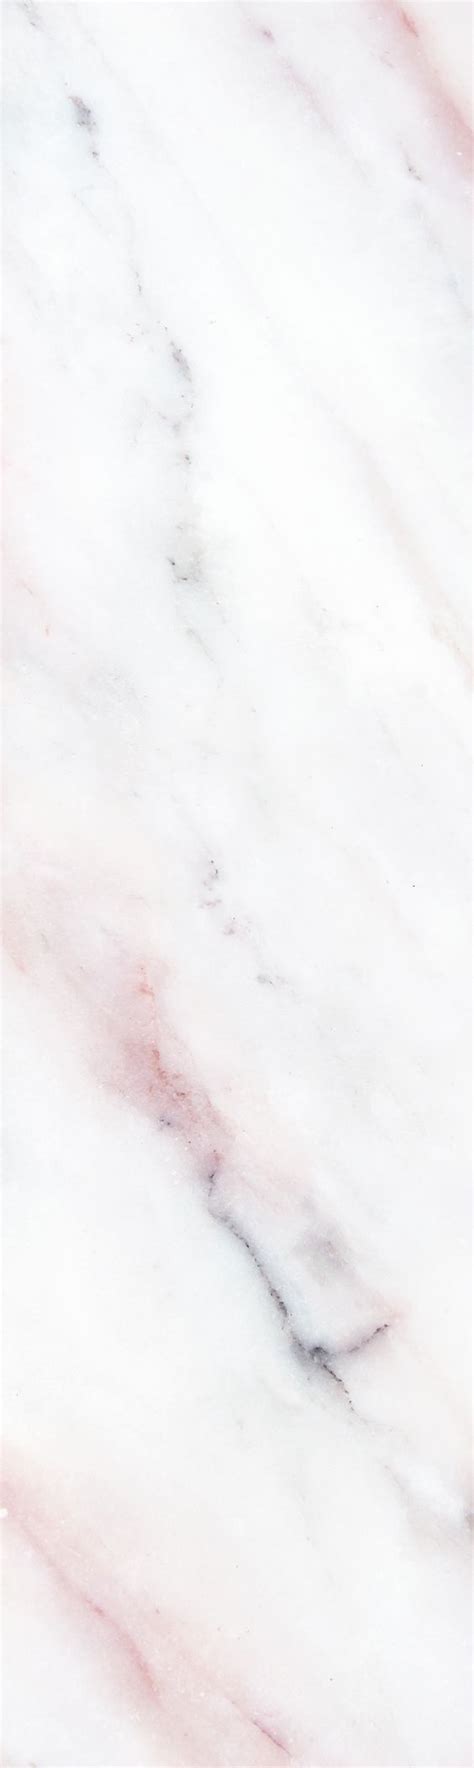 Soft Pastel Pink Marble Wallpaper Mural Hovia Pink Marble Wallpaper